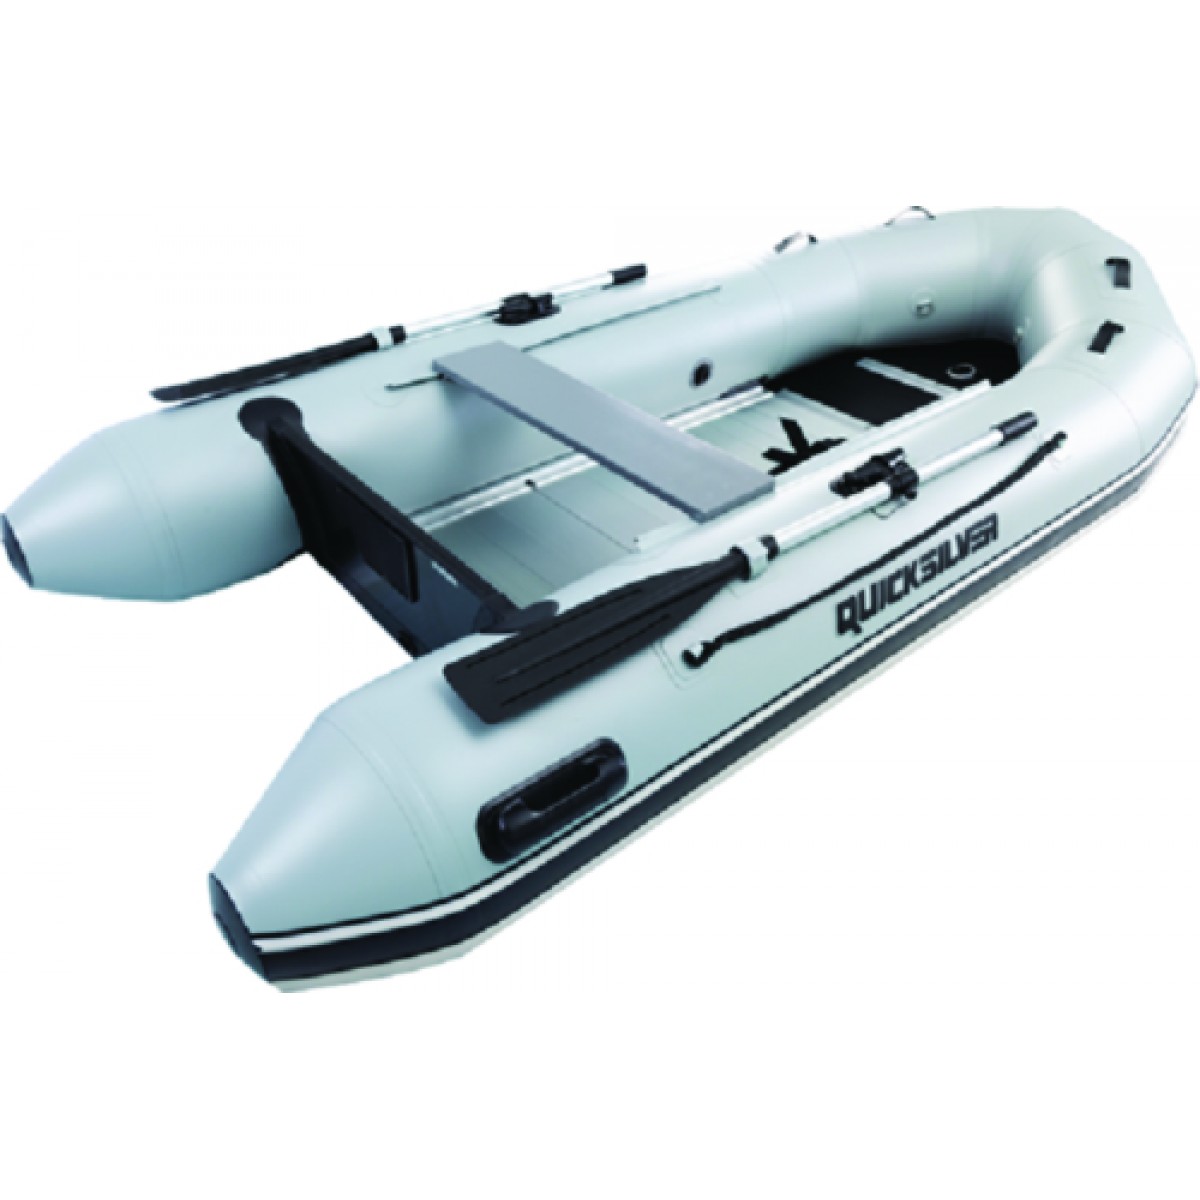 Quicksilver Sport 250, 2.49 Meter Inflatable Boat With Aluminum